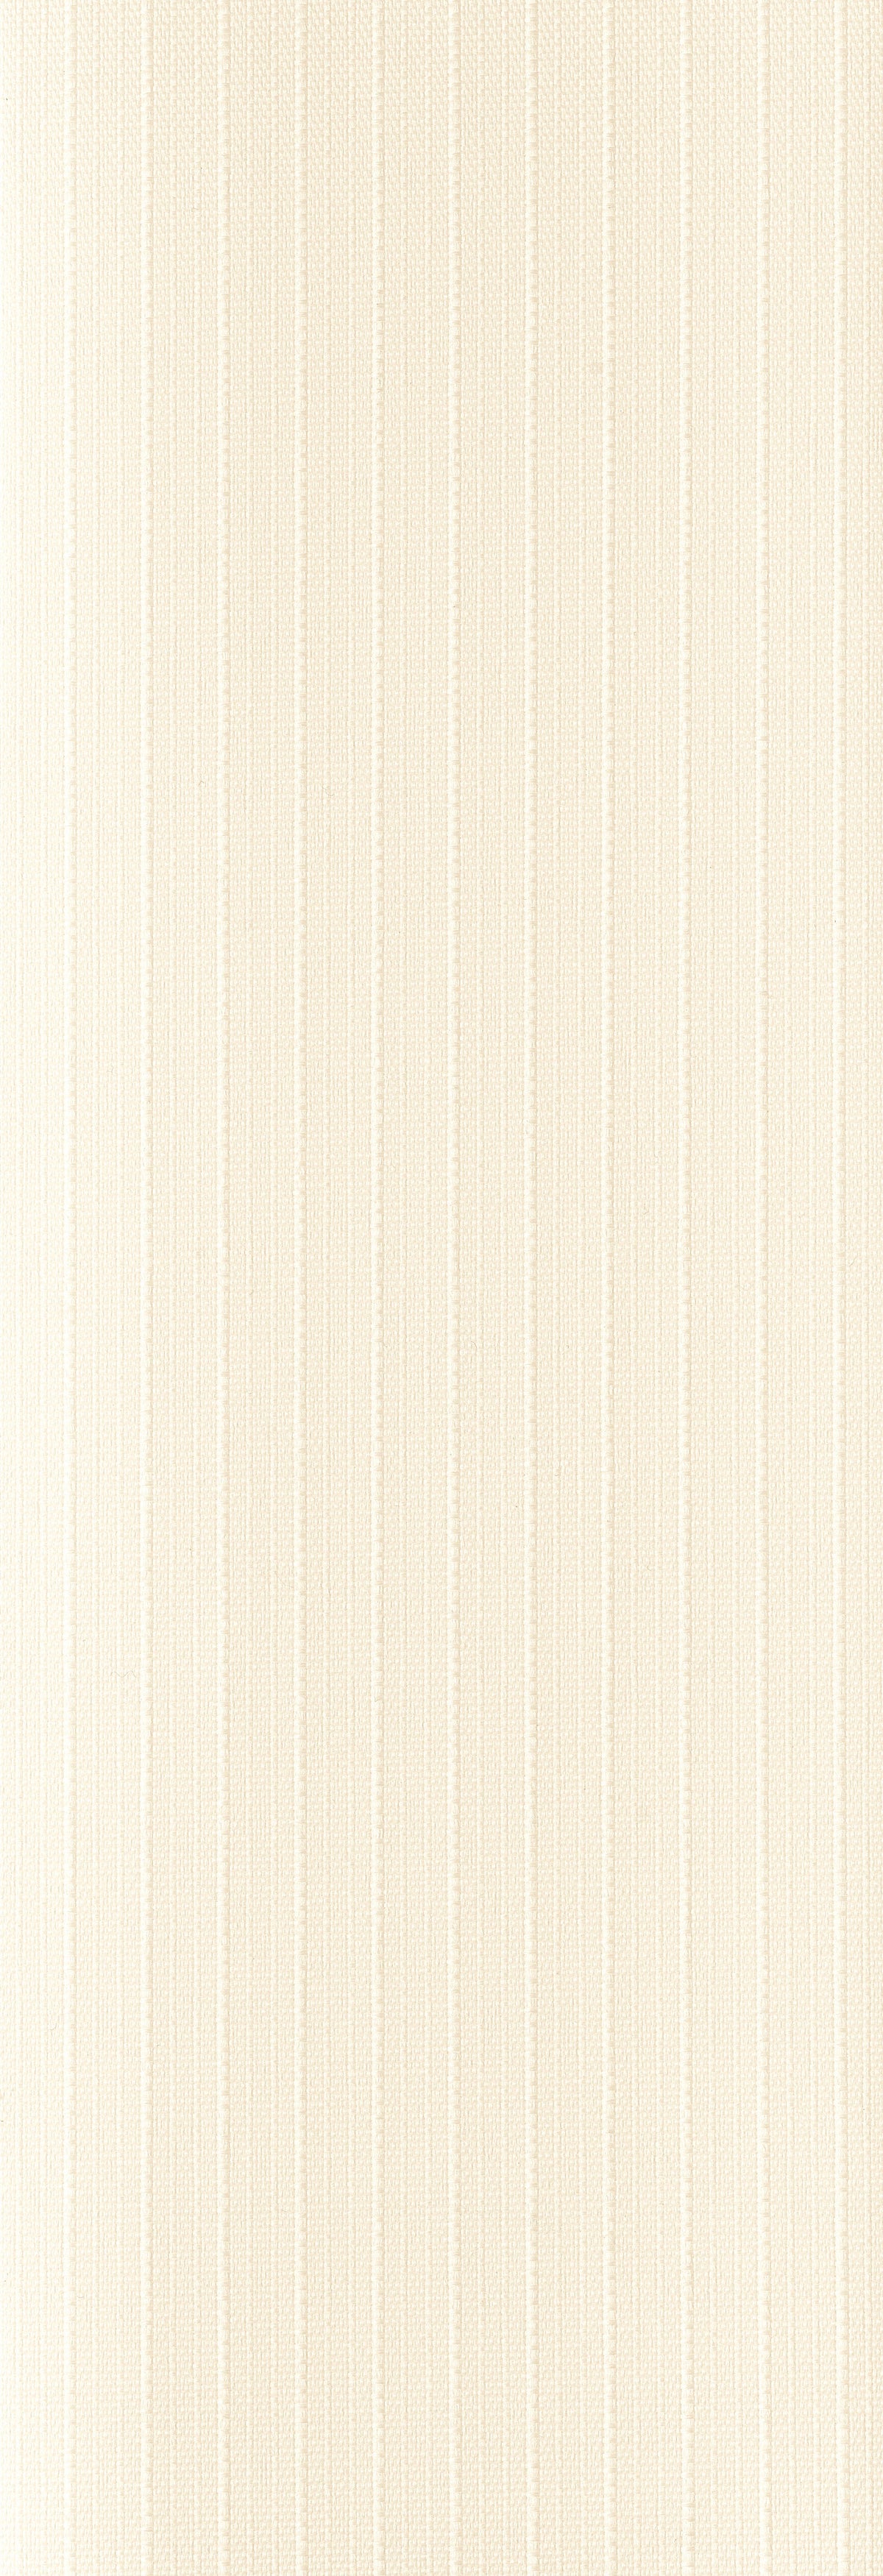 Stripe Ivory Vertical Replacement Blind Slat